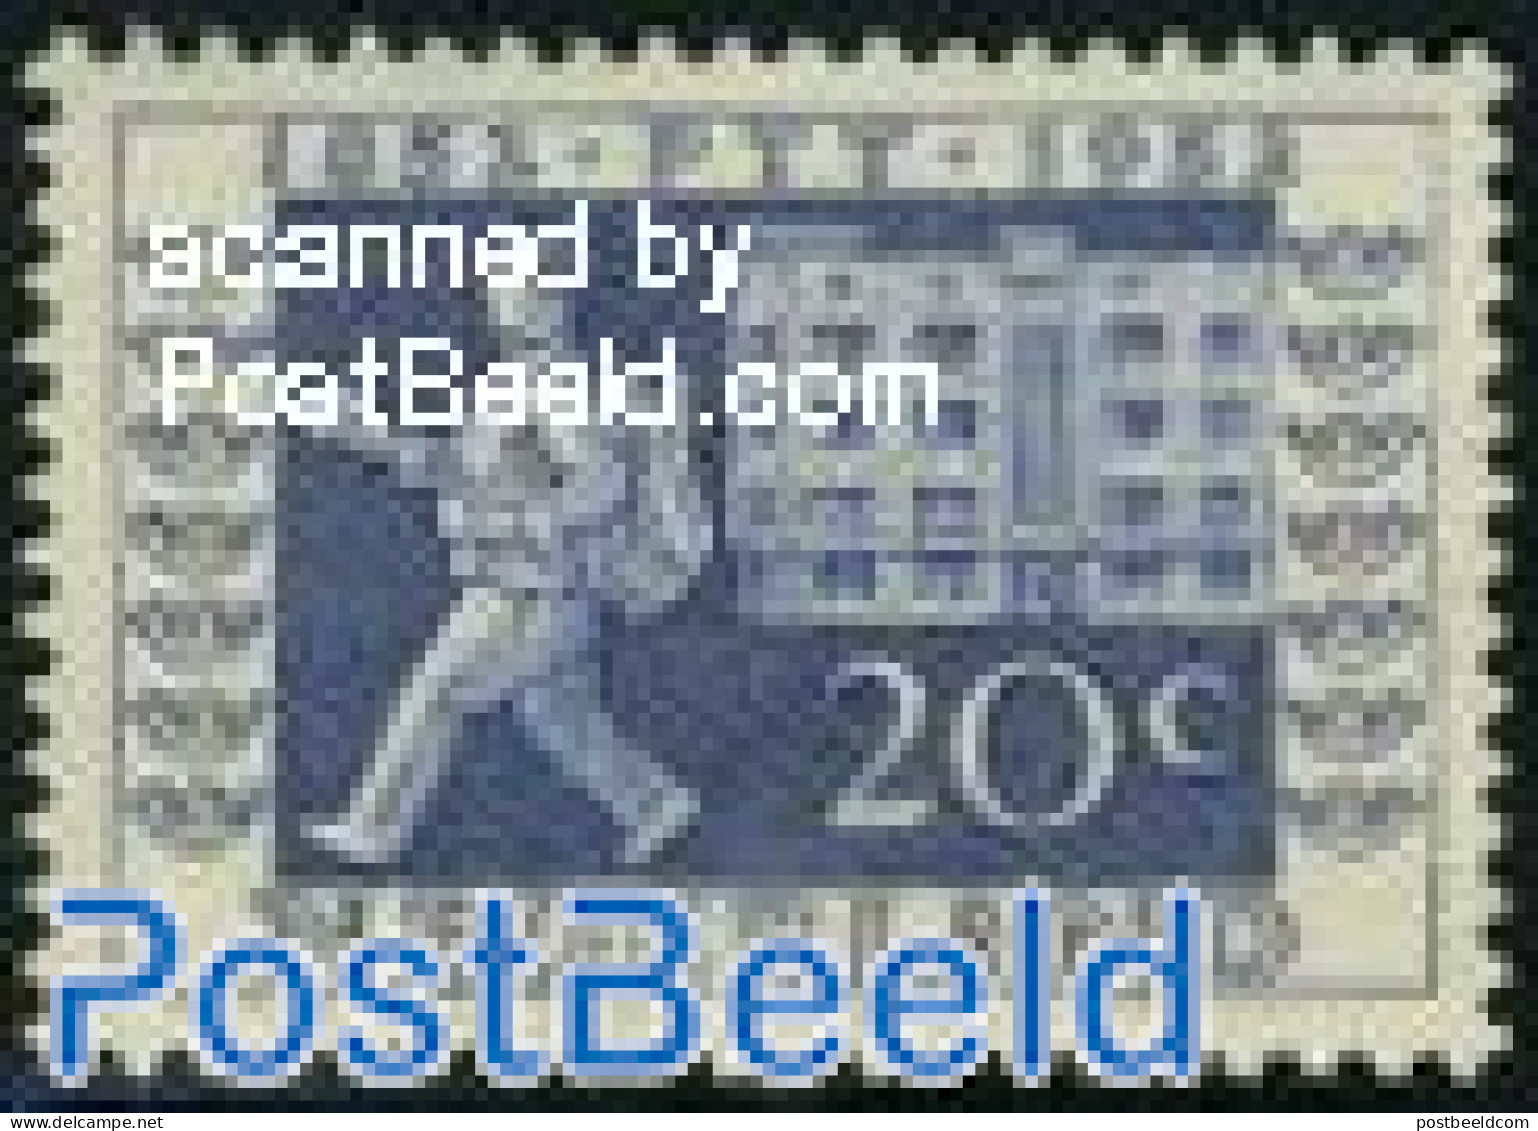 Netherlands 1952 20c Post In 1952, Stamp Out Of Set, Mint NH - Ongebruikt